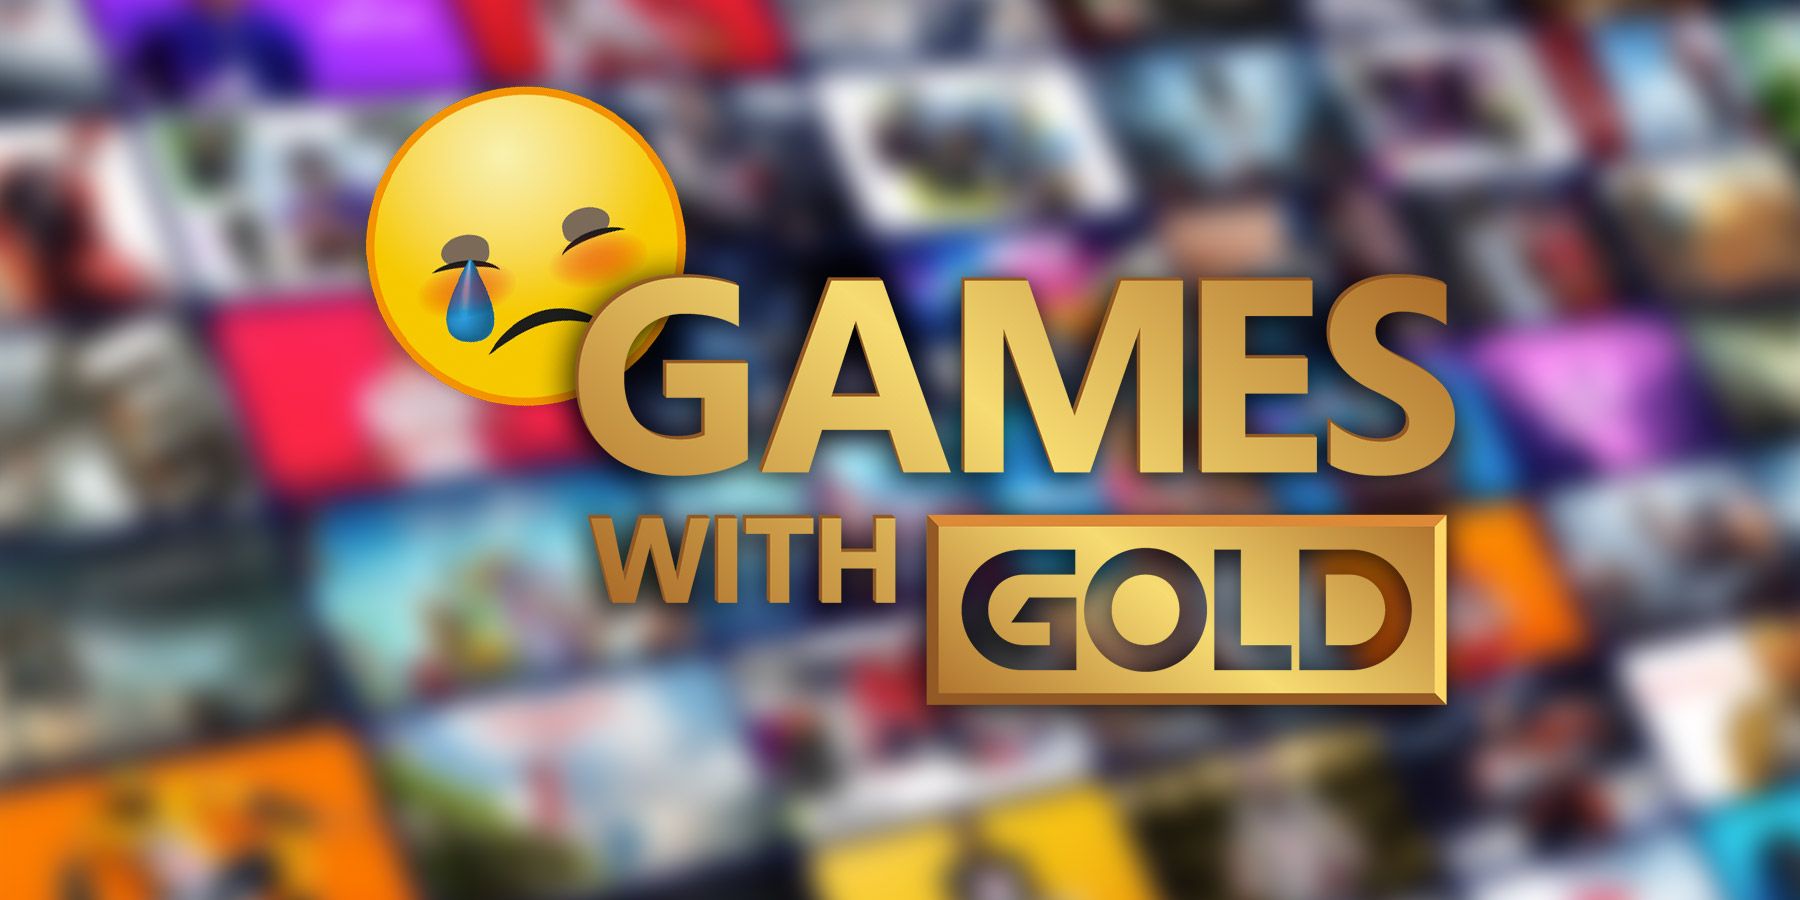 Xbox Fans Game With Gold Unhappy February